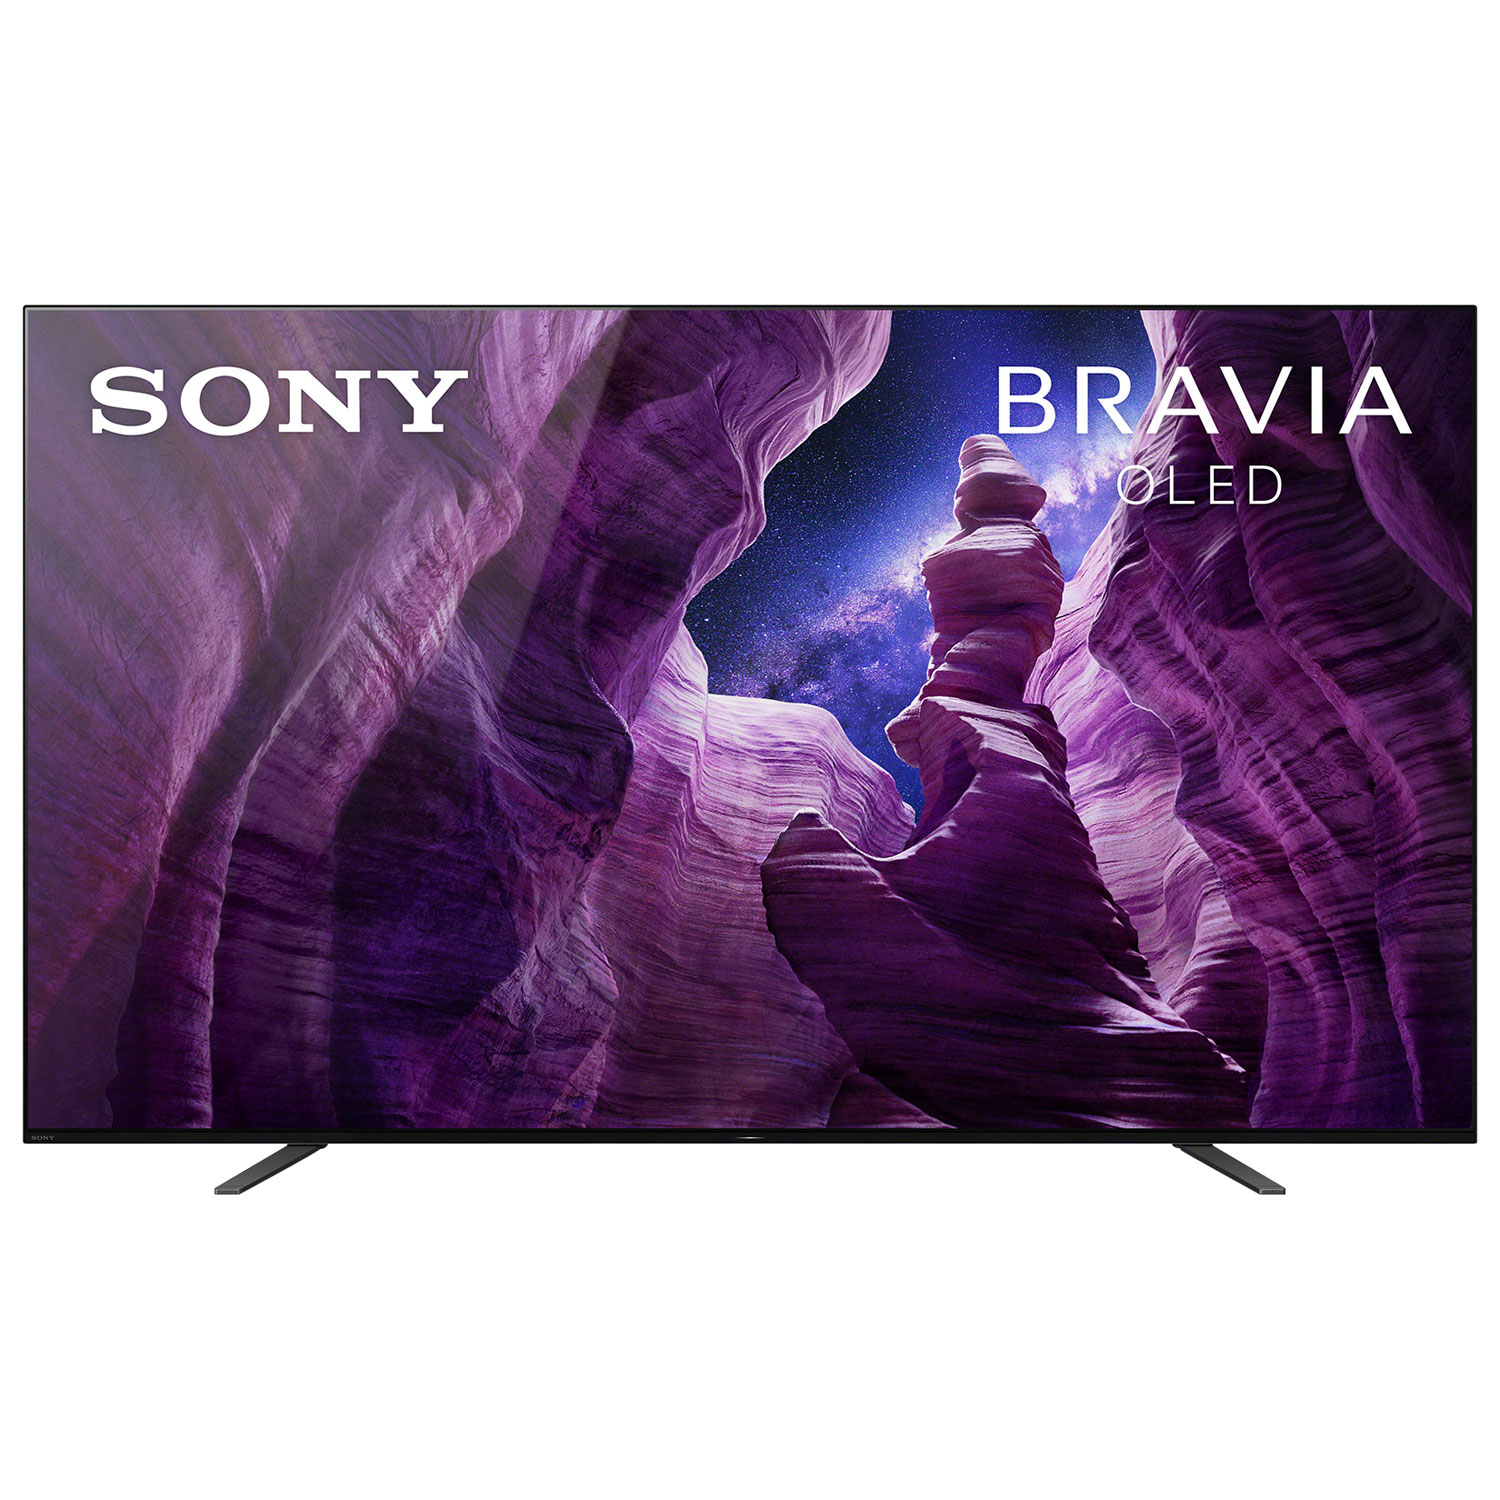 Sony BRAVIA 65" 4K UHD HDR OLED Android Smart TV (XBR65A8H)